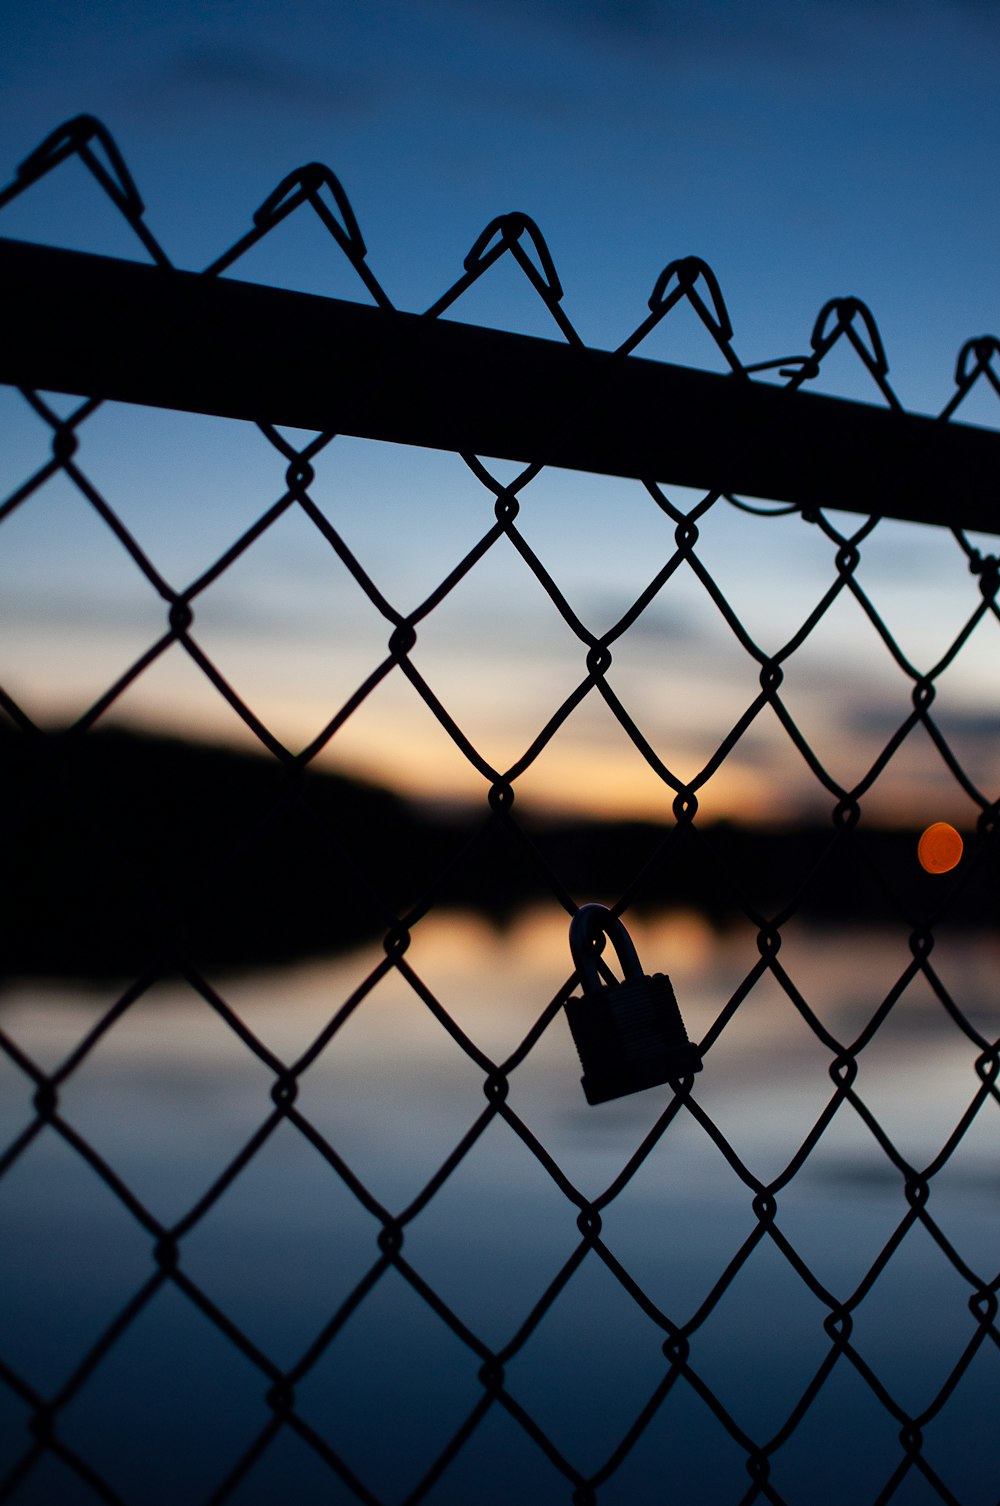 padlock on chain link fence